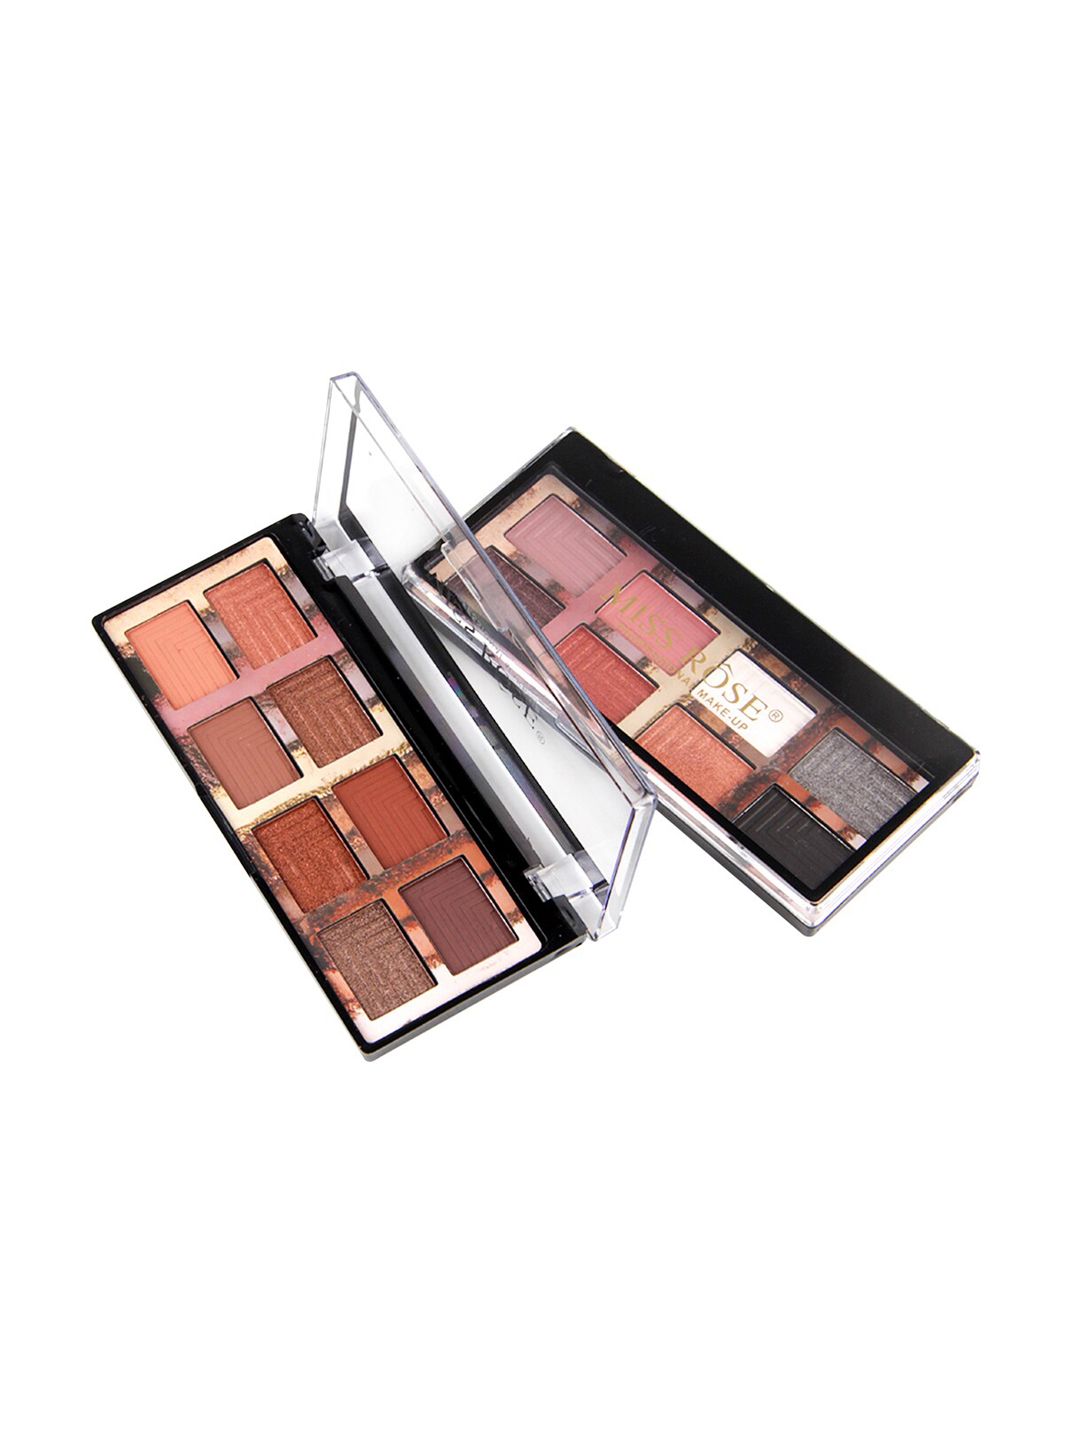 MISS ROSE 8 Color Nude Eyeshadow Palette - 7001-004Z1 01 Price in India